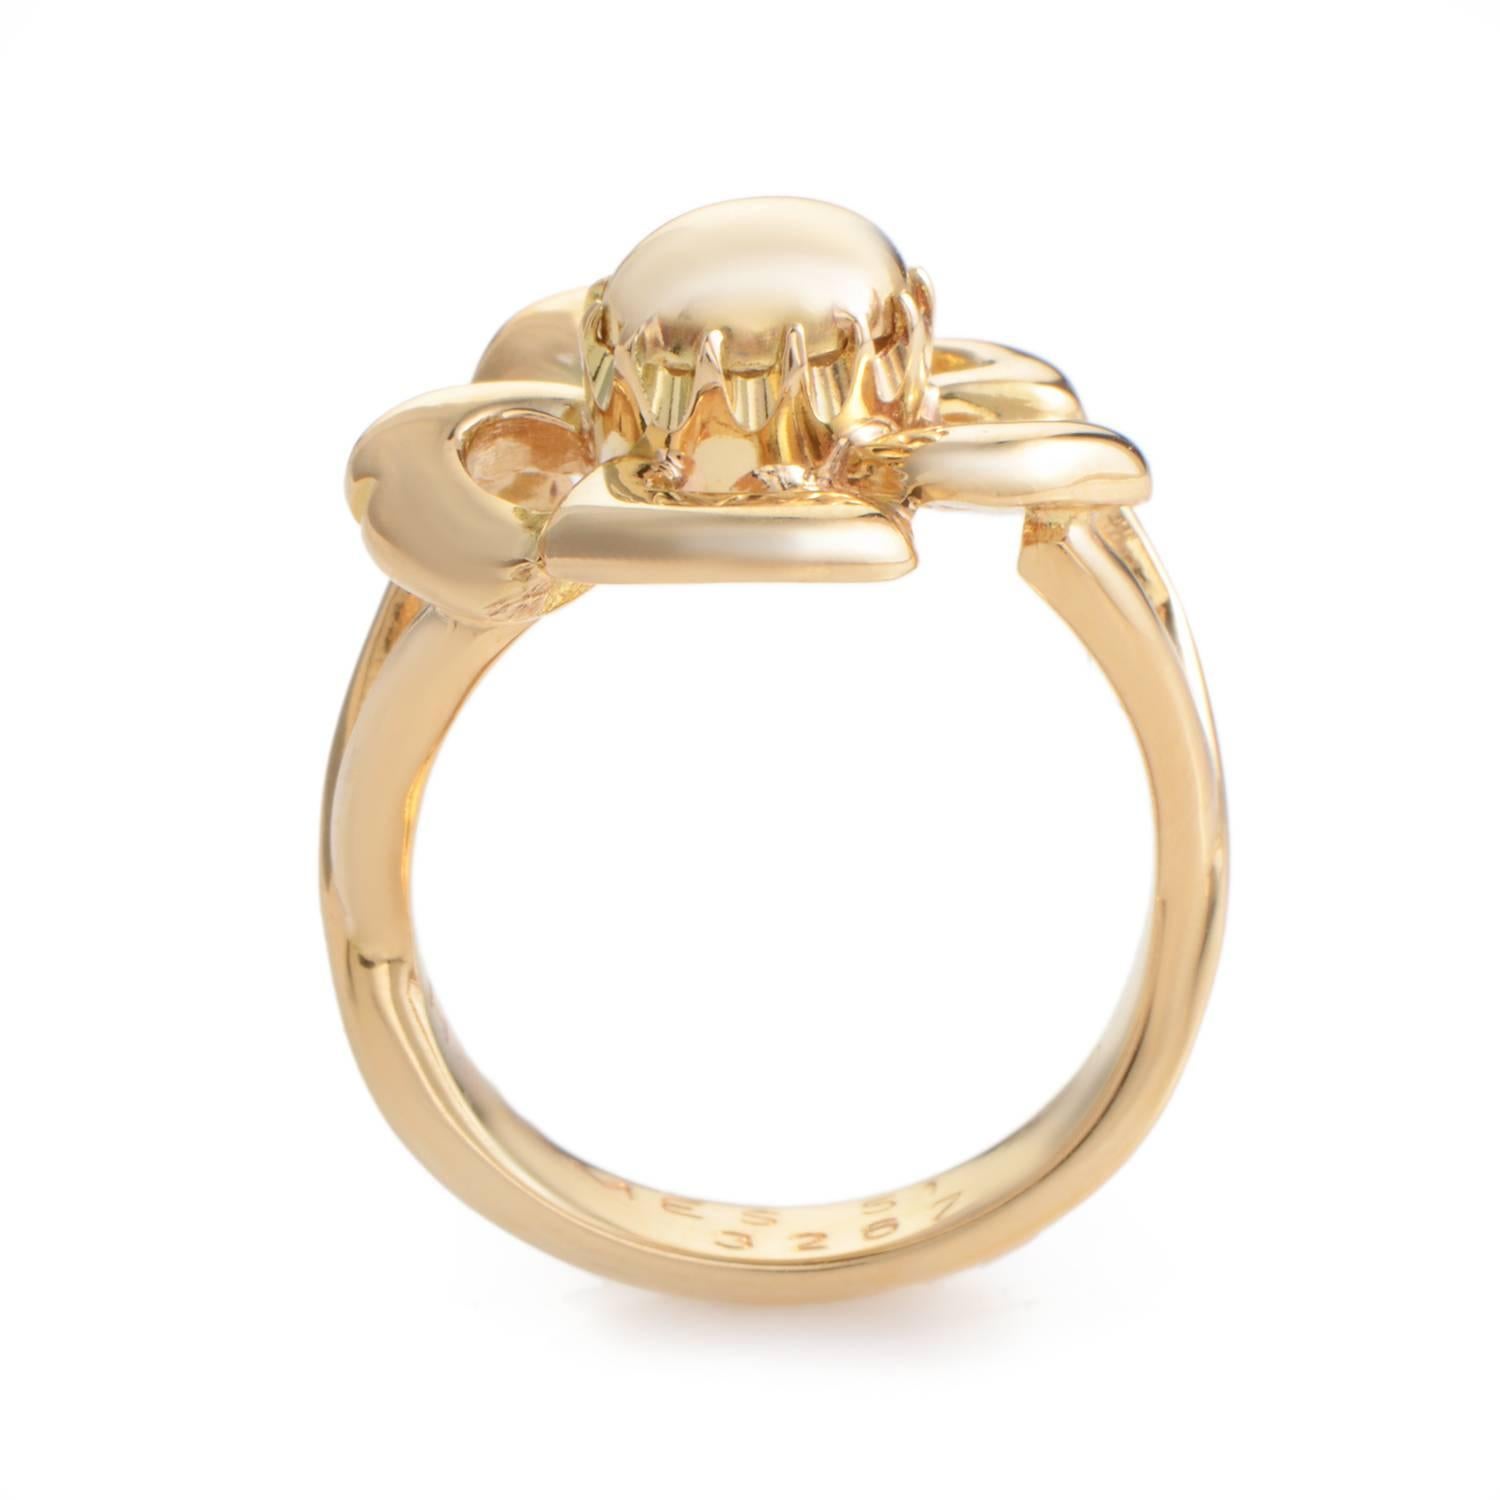 Simplicity and creativity combine in this delightful ring from Hermès, depicting a flower in a graceful and charming manner while the sheer intrinsic radiance of 18K yellow gold is brought out by exquisite crafting and finish.
Ring Size: